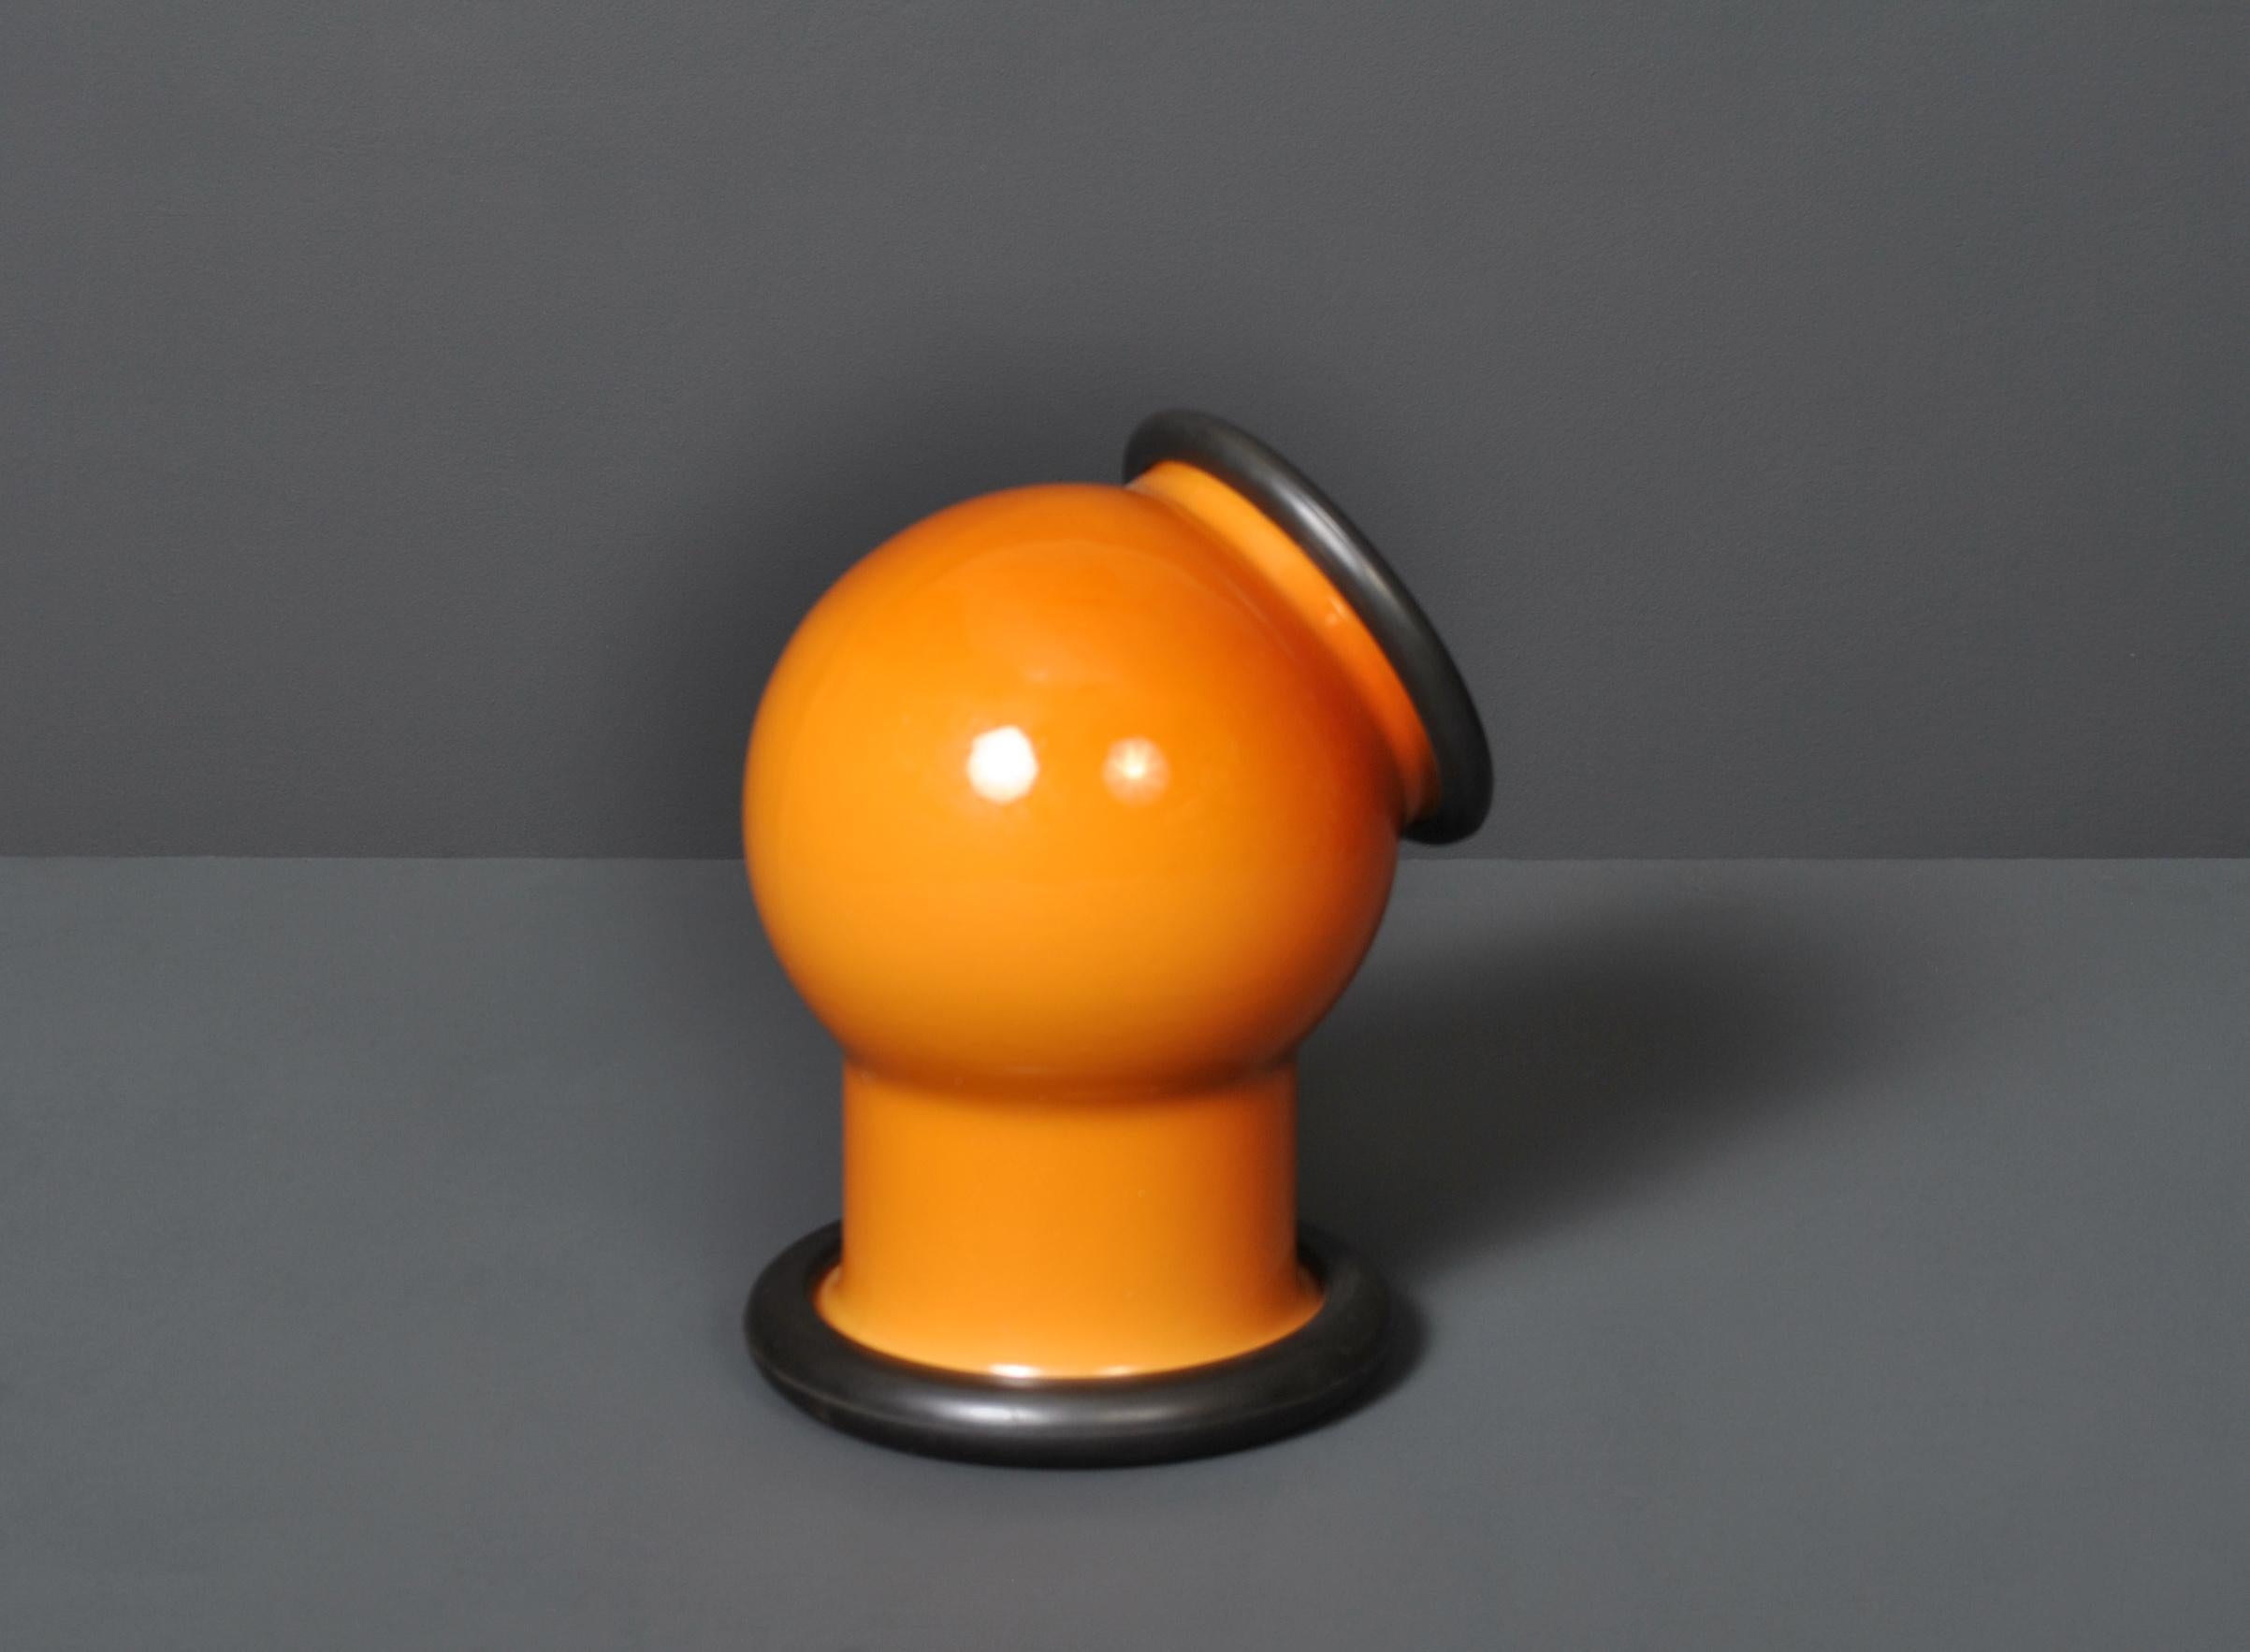 Glass Midcentury Holmegaard Lamp by Michael Bang, 1972